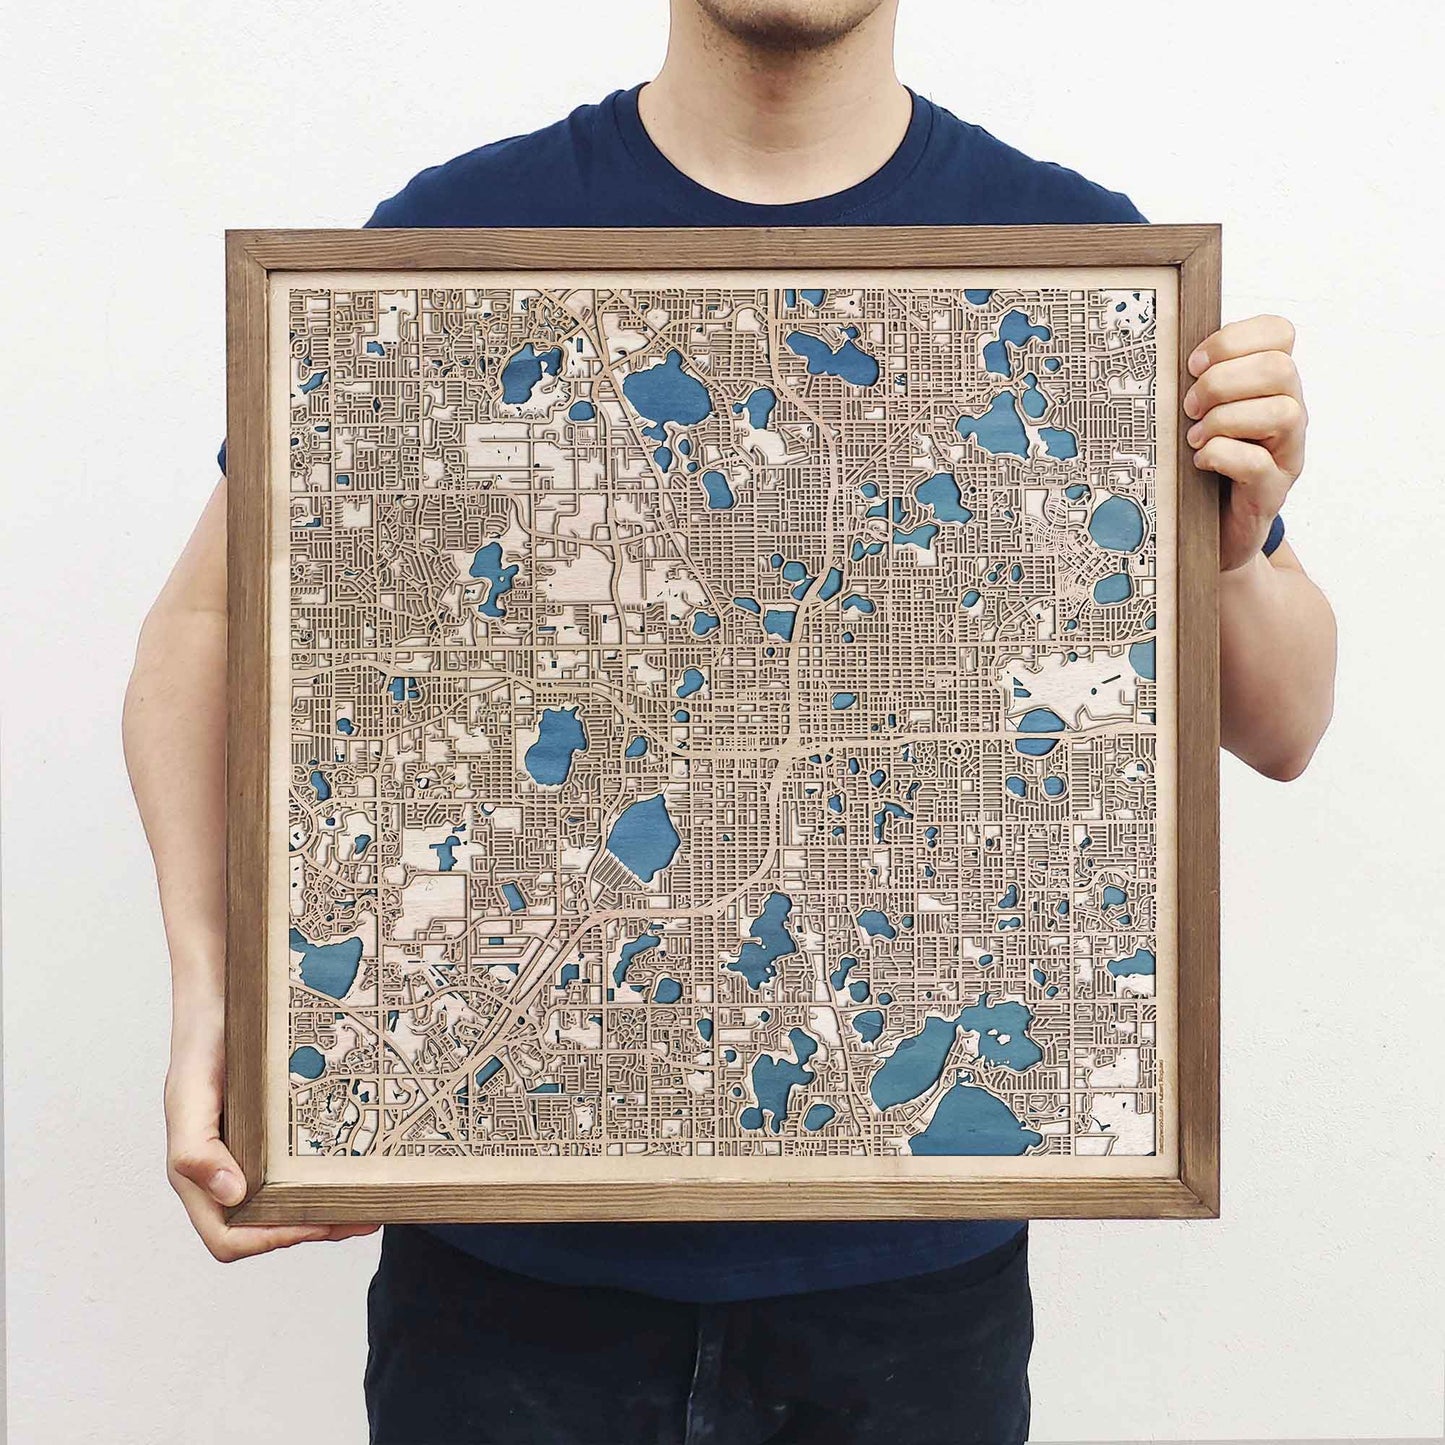 Orlando Wooden Map by CityWood - Custom Wood Map Art - Unique Laser Cut Engraved - Anniversary Gift